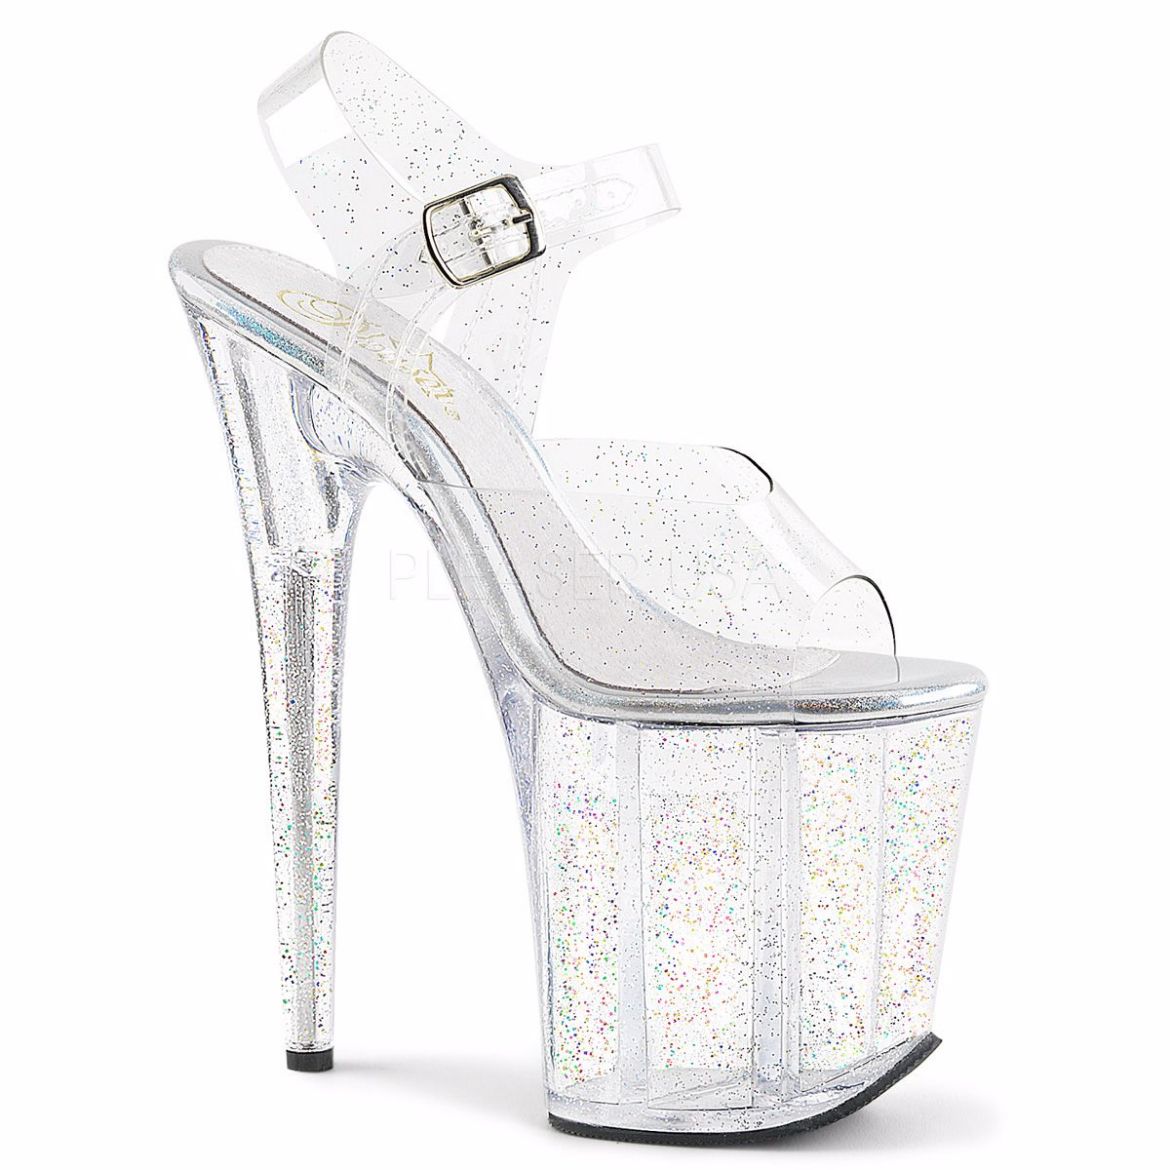 Product image of Pleaser Flamingo-808Mmg Clear/Clear, 8 inch (20.3 cm) Heel, 4 inch (10.2 cm) Platform Sandal Shoes